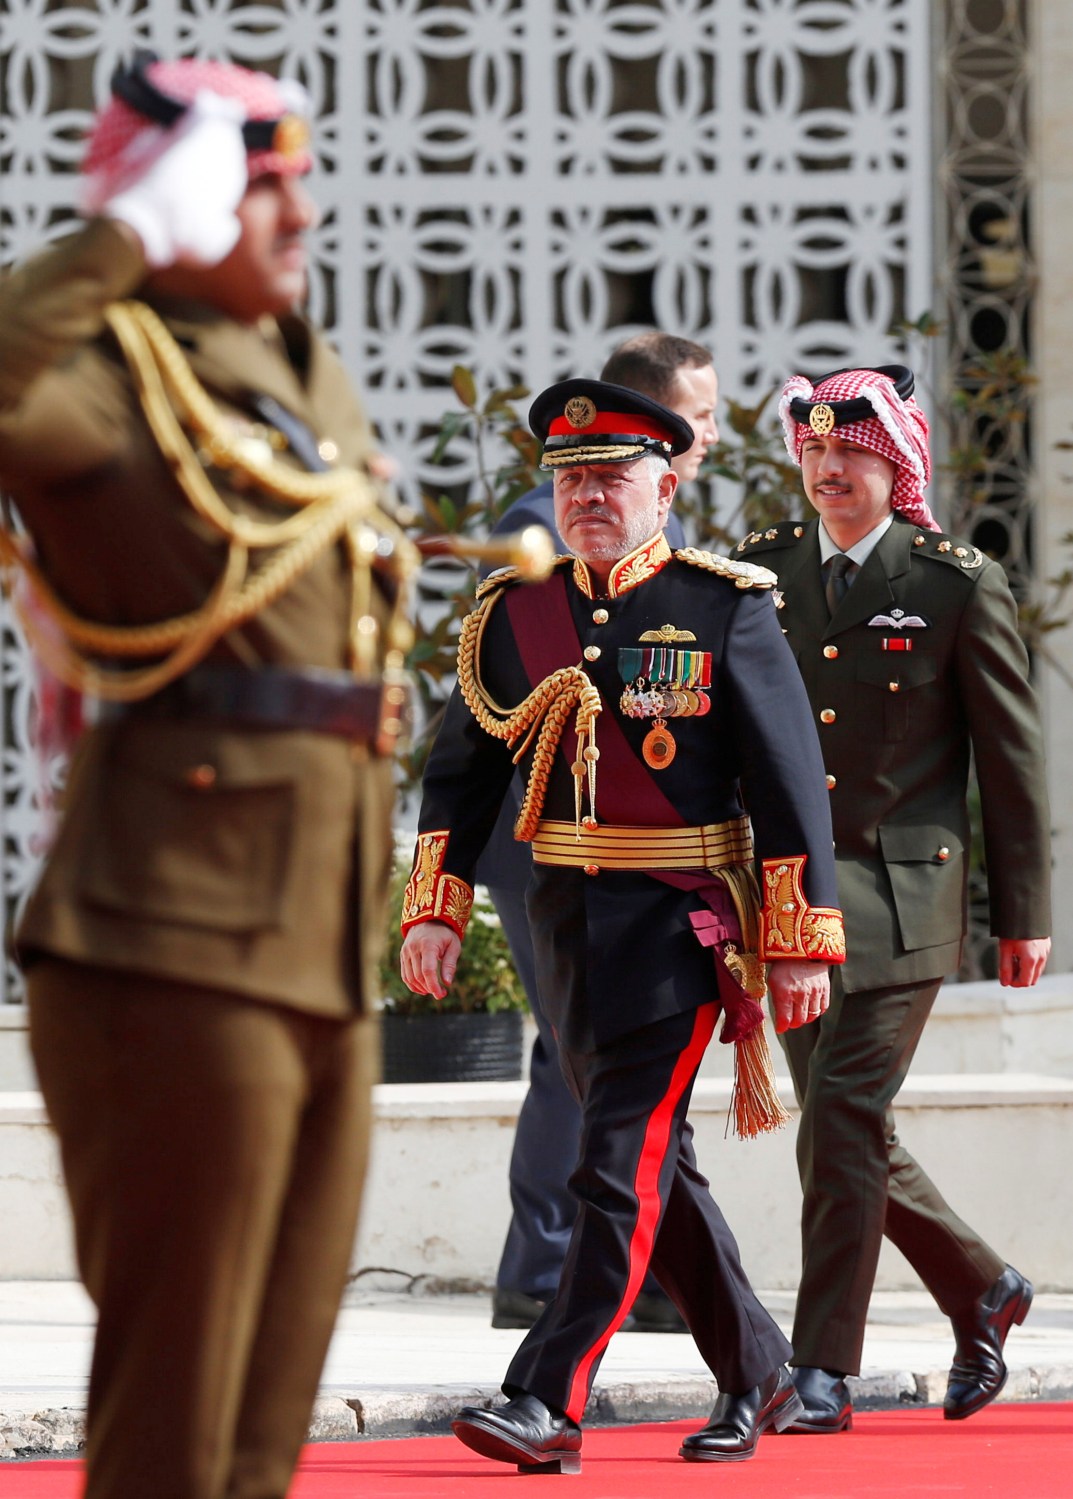 Jordan's King Abdullah and Crown Prince Hussein arrive for the opening of the fourth ordinary session of the 18th Parliament in Amman, Jordan November 10, 2019. REUTERS/Muhammad Hamed